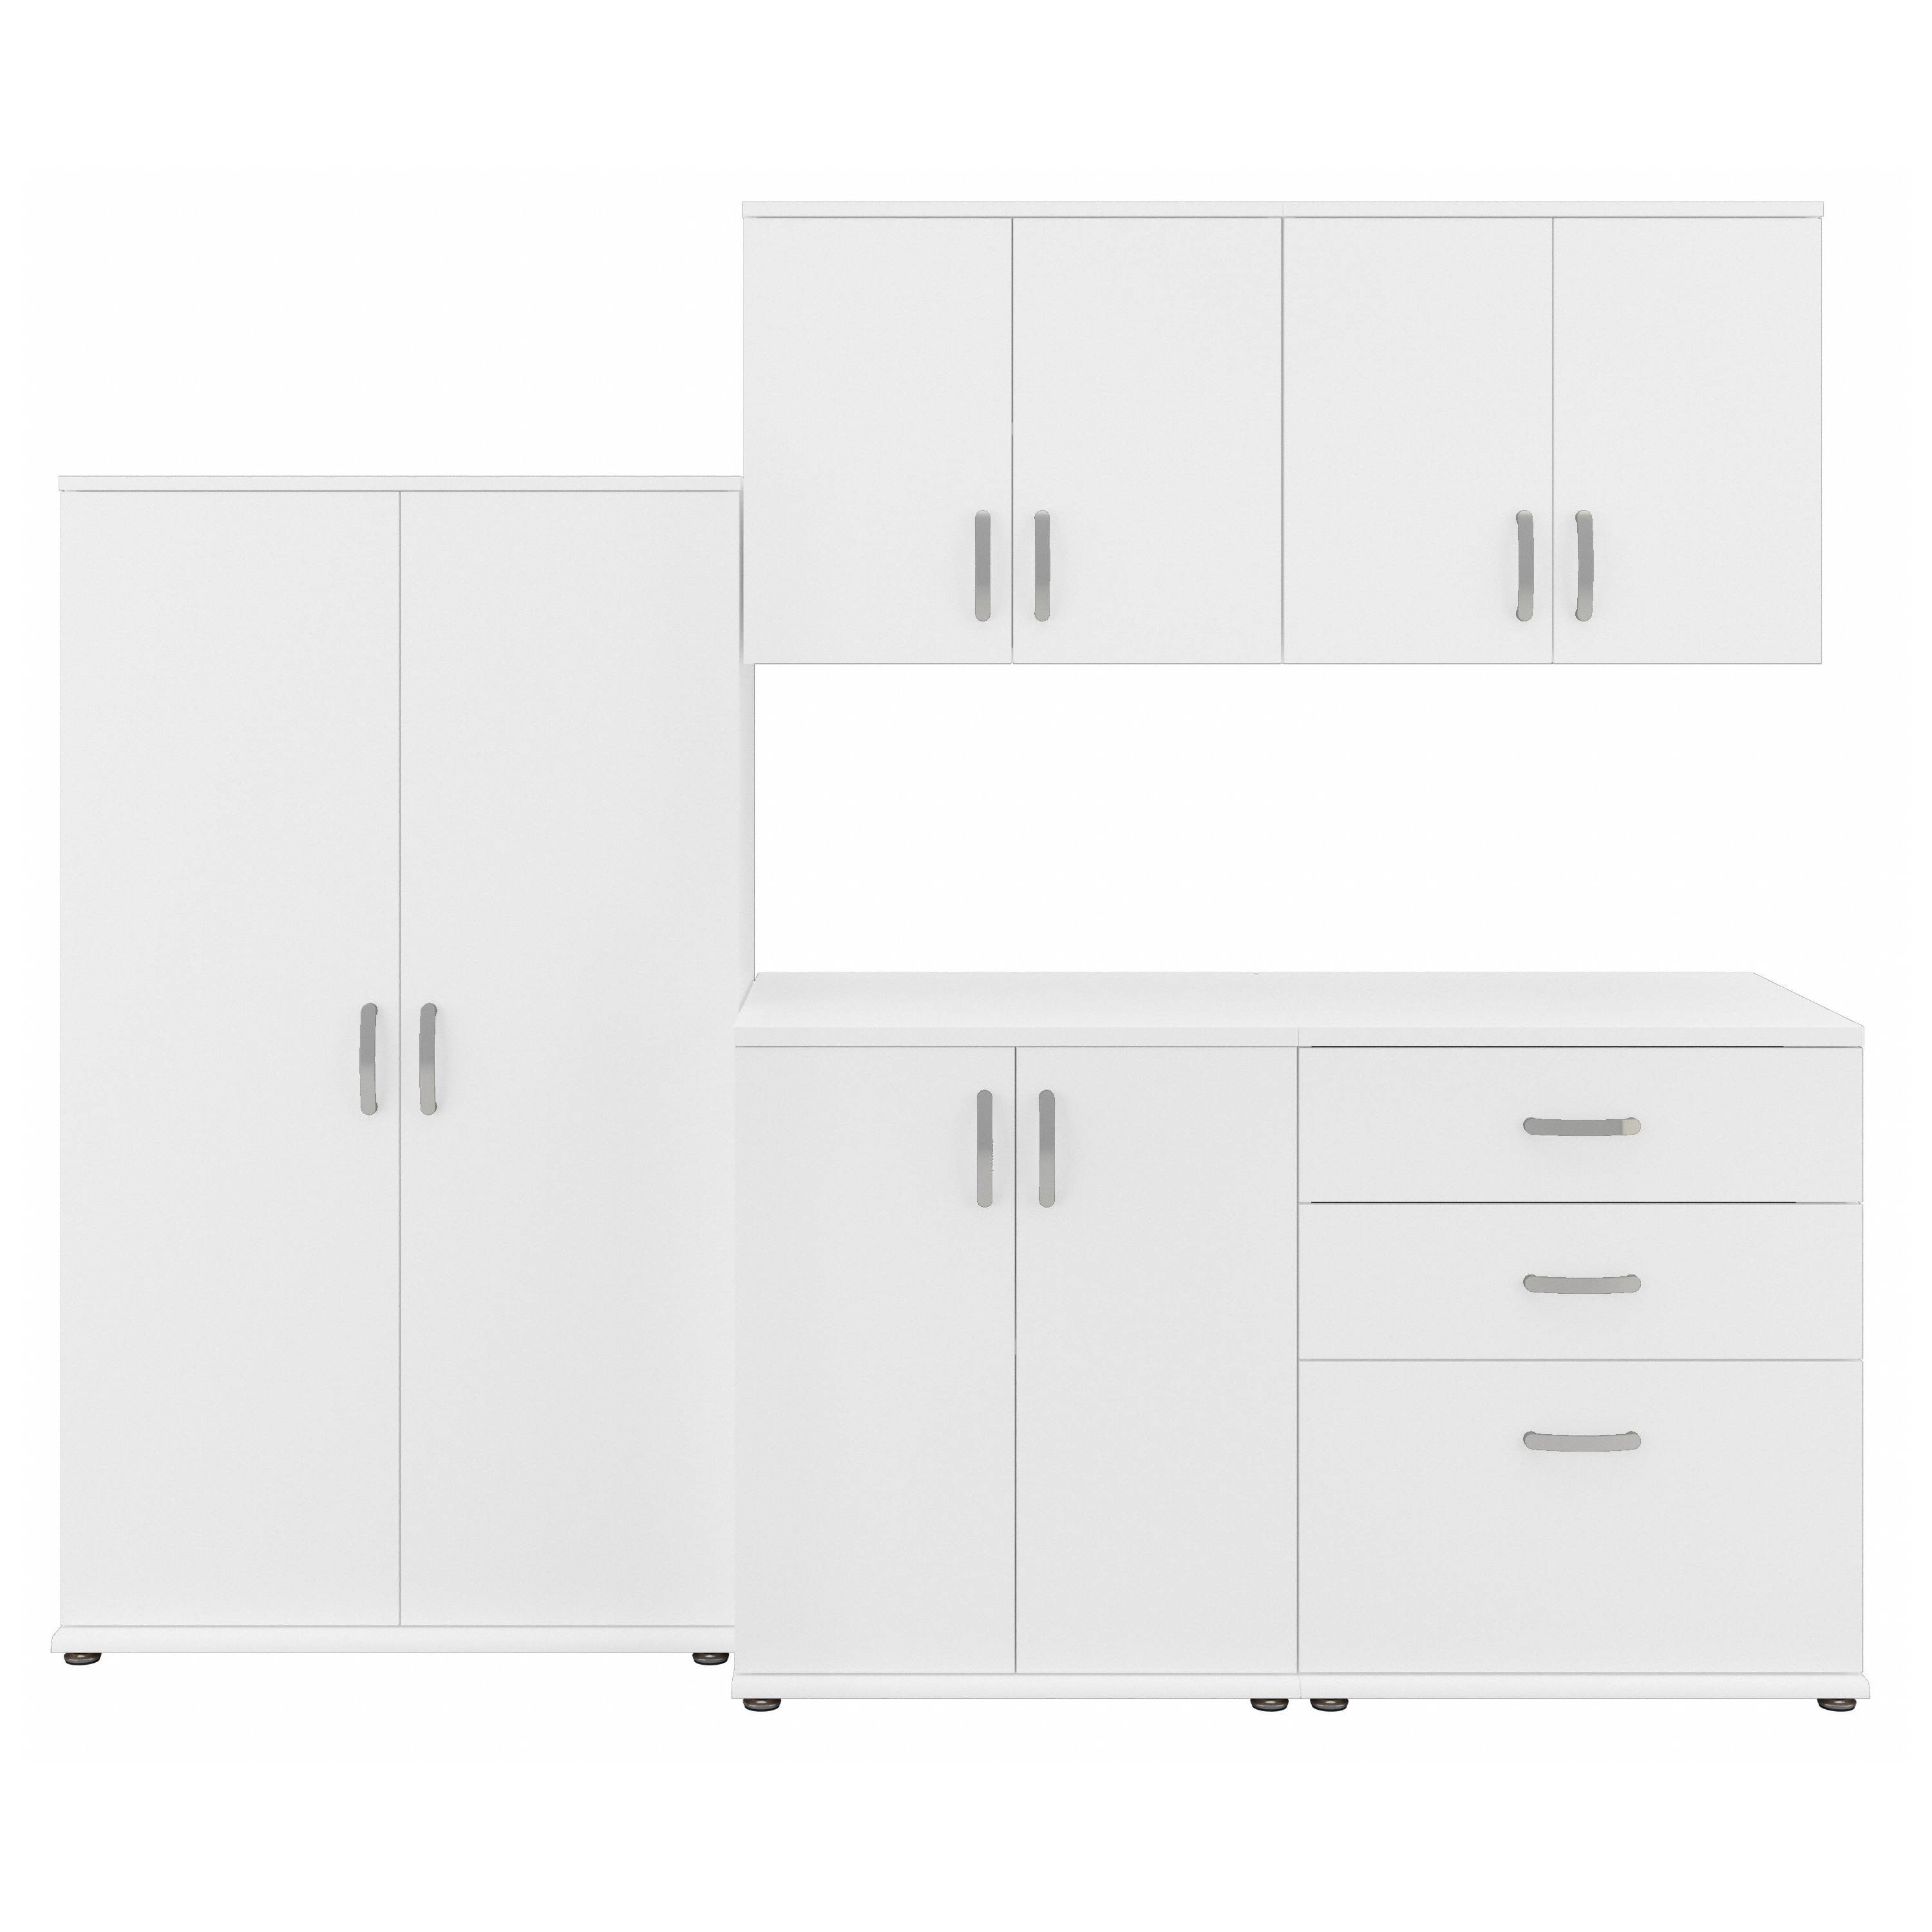 Shop Bush Business Furniture Universal 5 Piece Modular Garage Storage Set with Floor and Wall Cabinets 02 GAS003WH #color_white